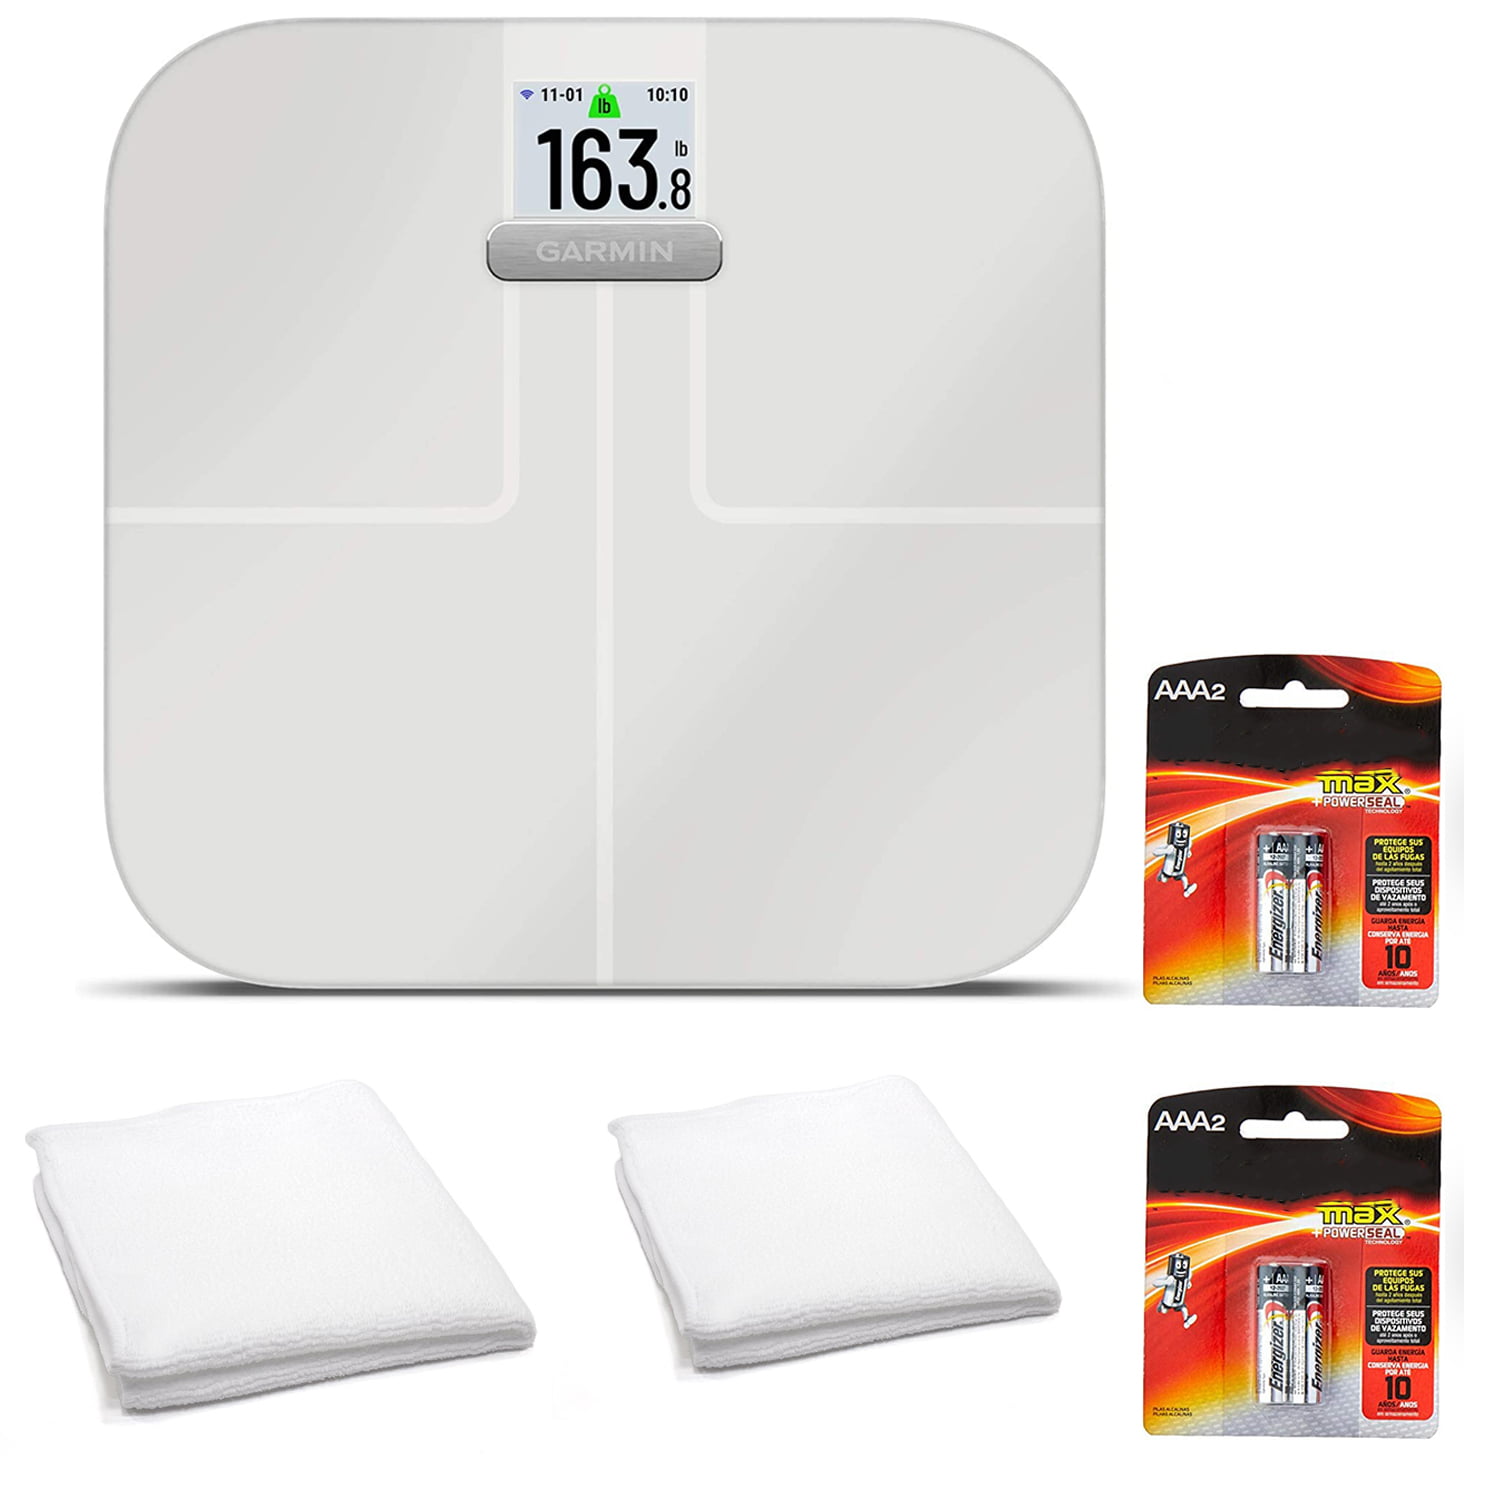 Garmin Index S2, Smart Scale with Wireless Connectivity, Measure Body Fat